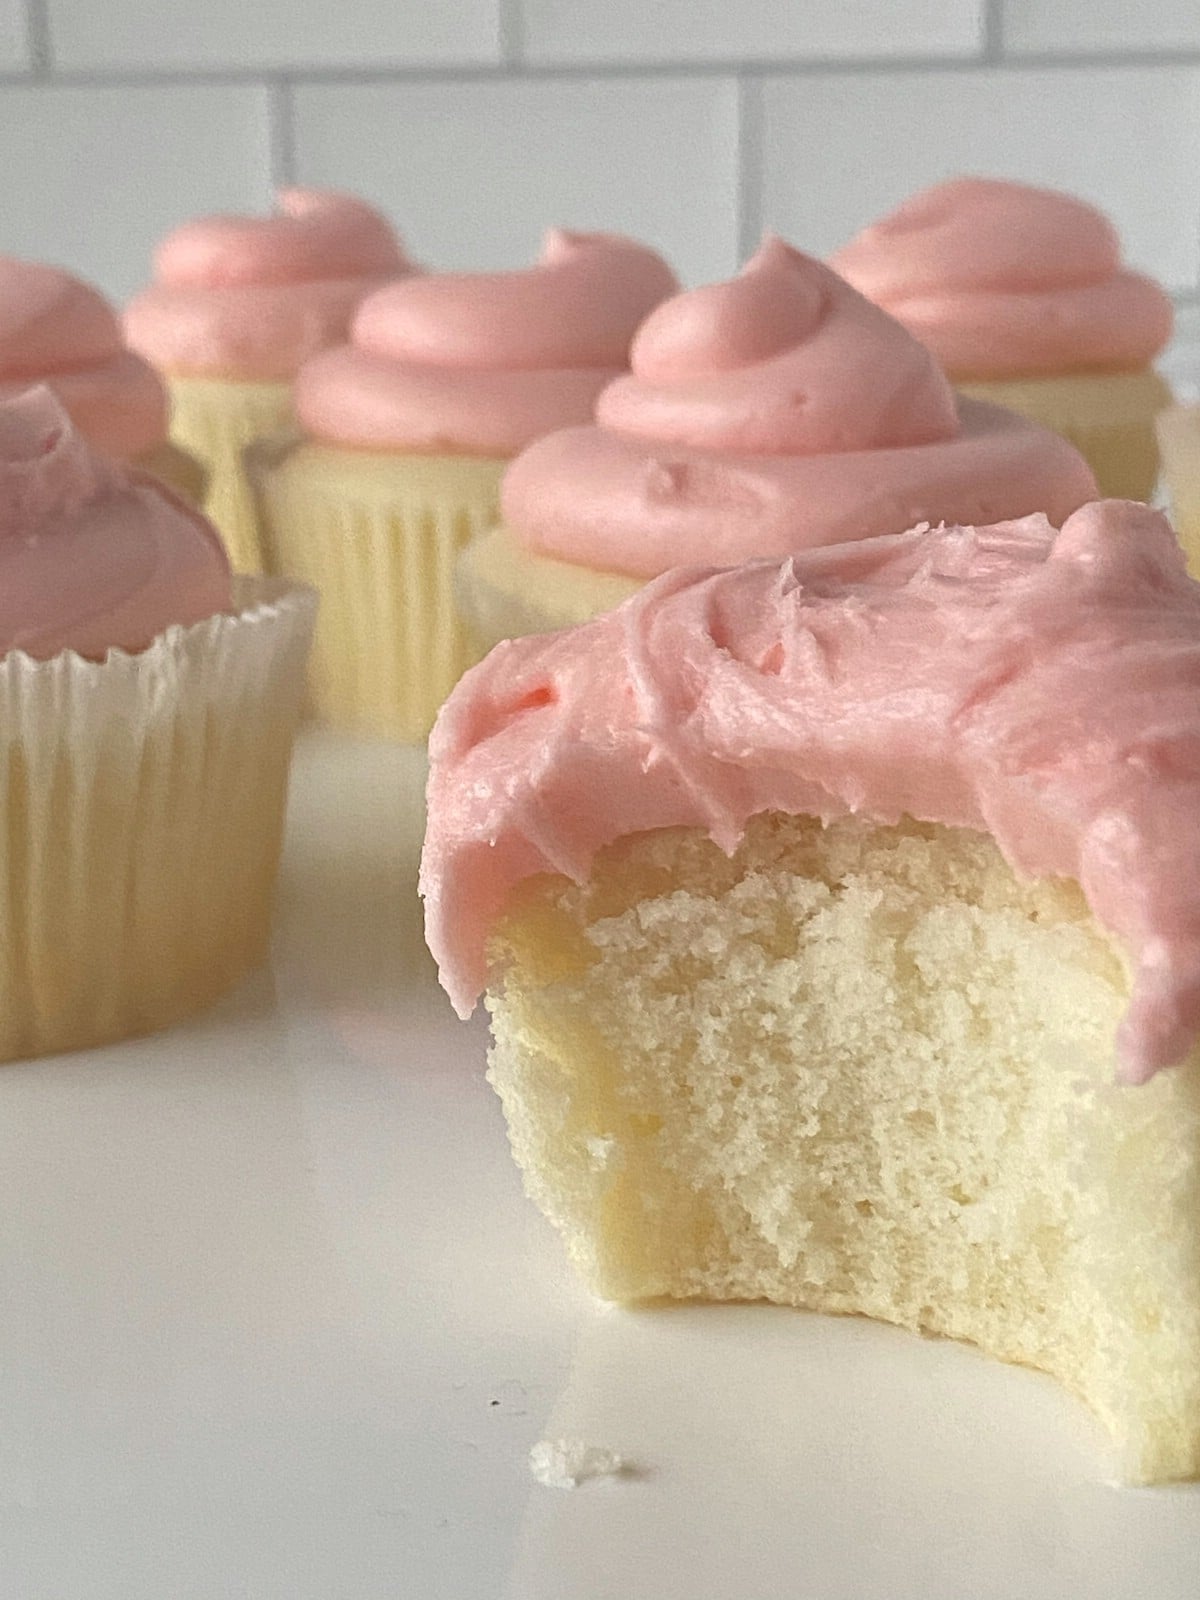 Cupcake with pink icing